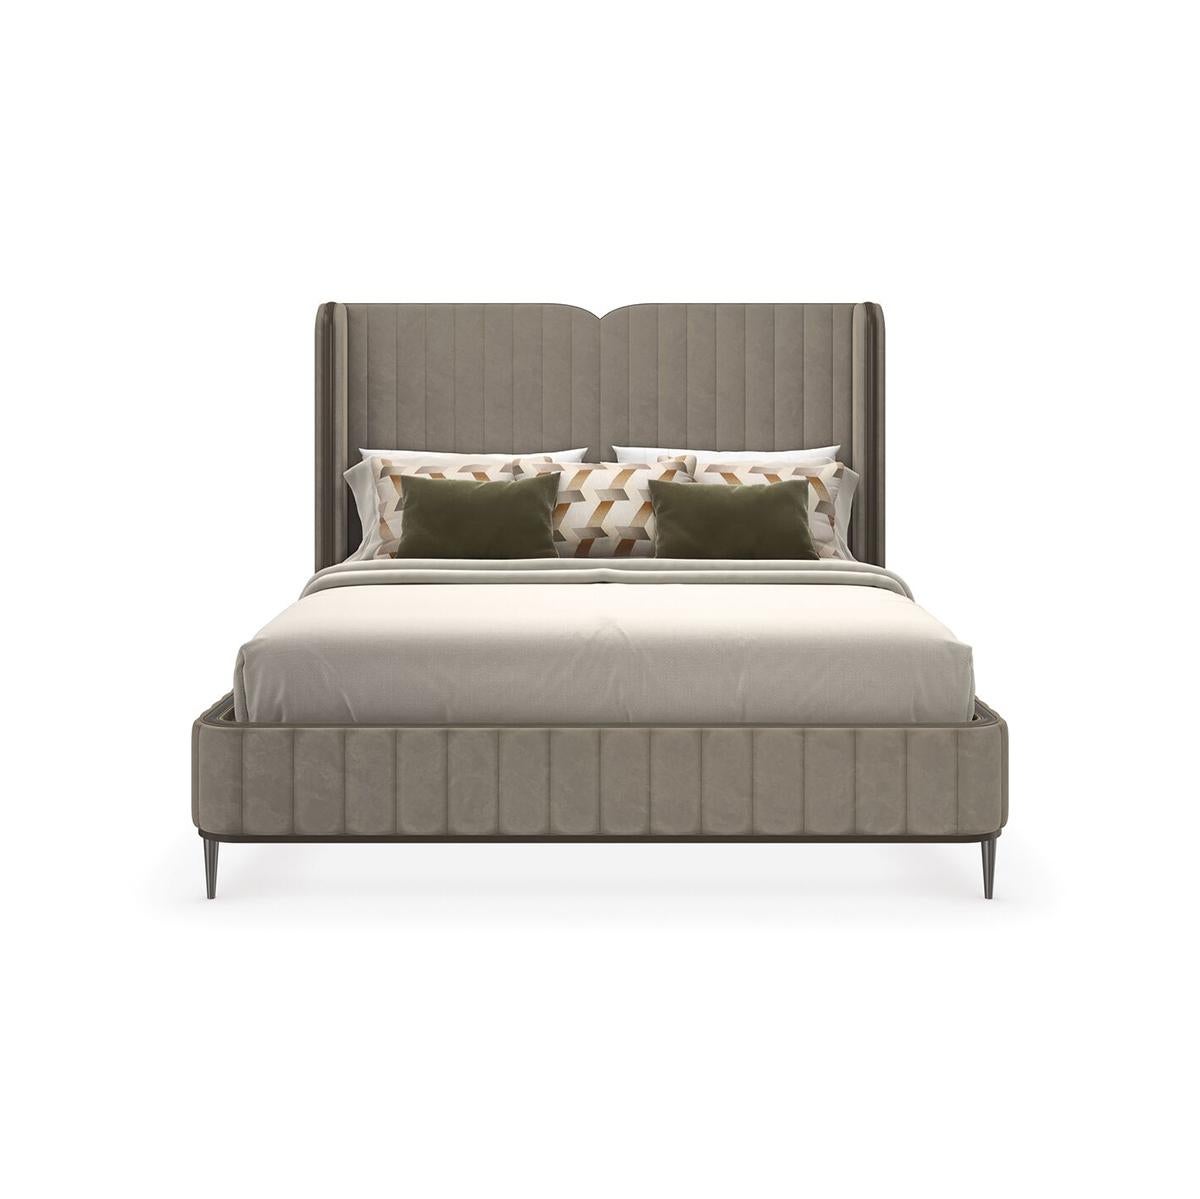 This is a contemporary velvet upholstered bed, featuring a high headboard with distinct vertical channel tufting that gives it a plush, sophisticated appearance. The vertical channel tufting goes uninterrupted, except for a slight dip at the center